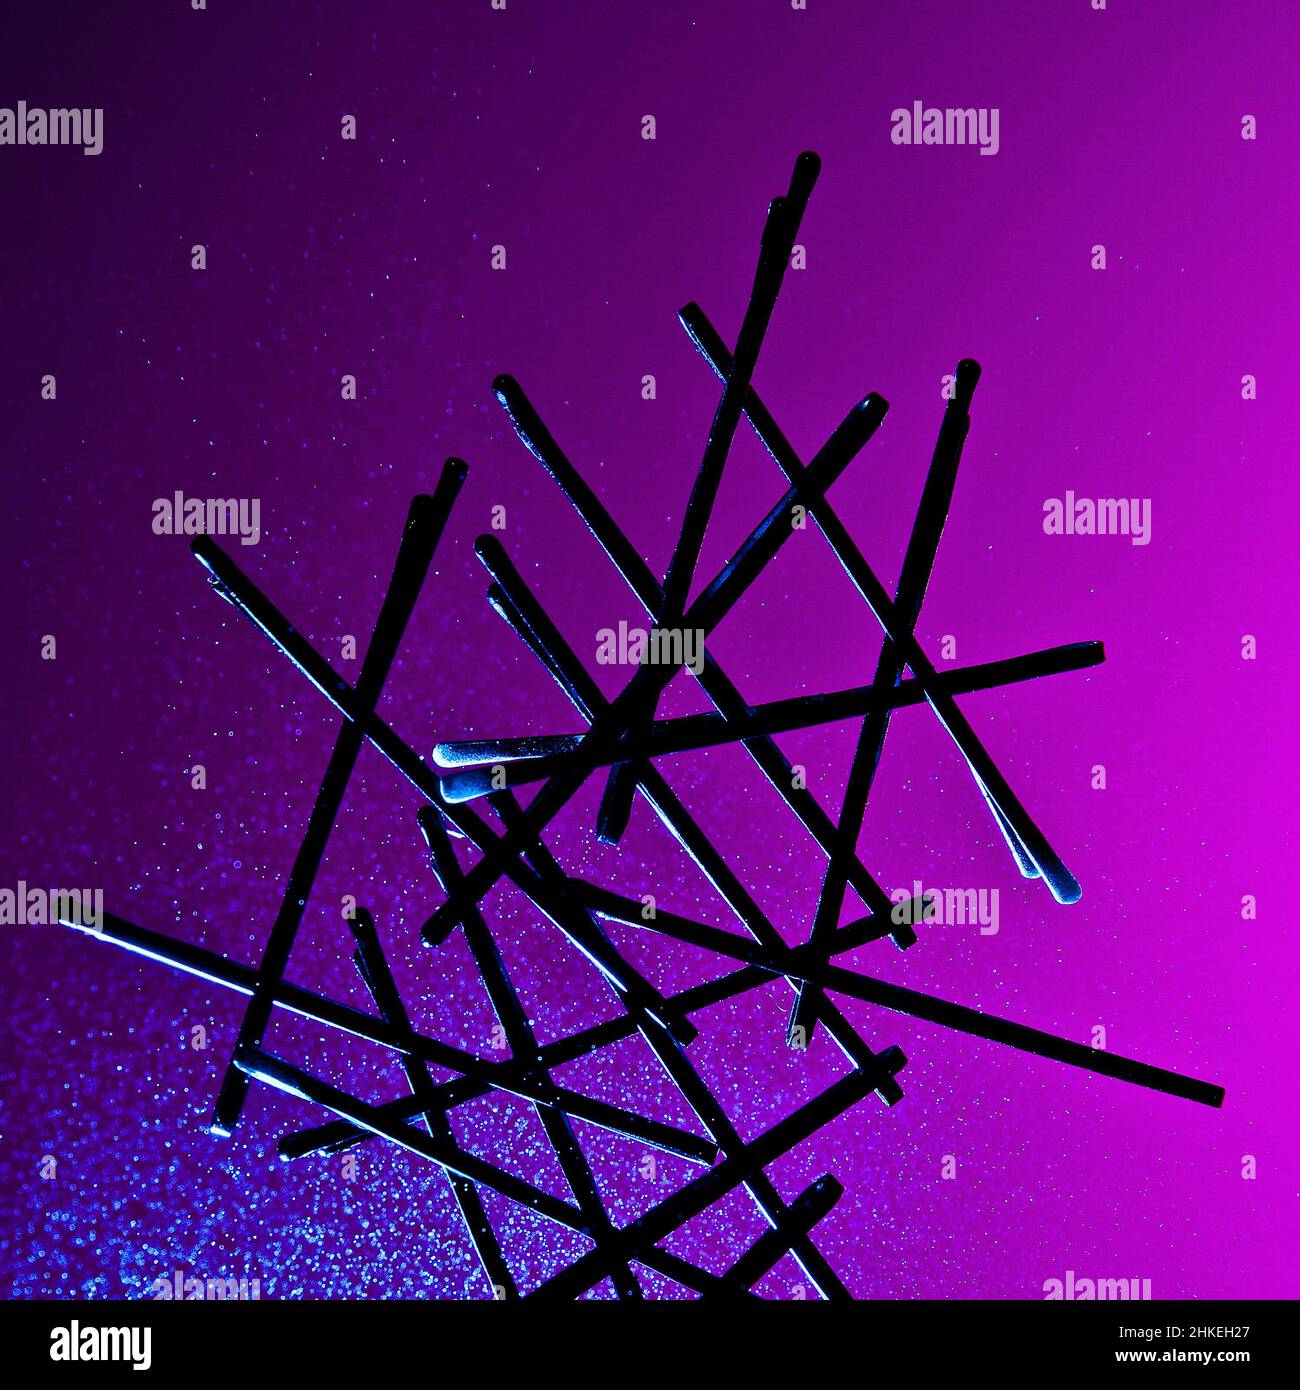 An abstract conceptual artful silhouette of bobby pins, backlit against a saturated purple and pink background with a glowing misted spray Stock Photo